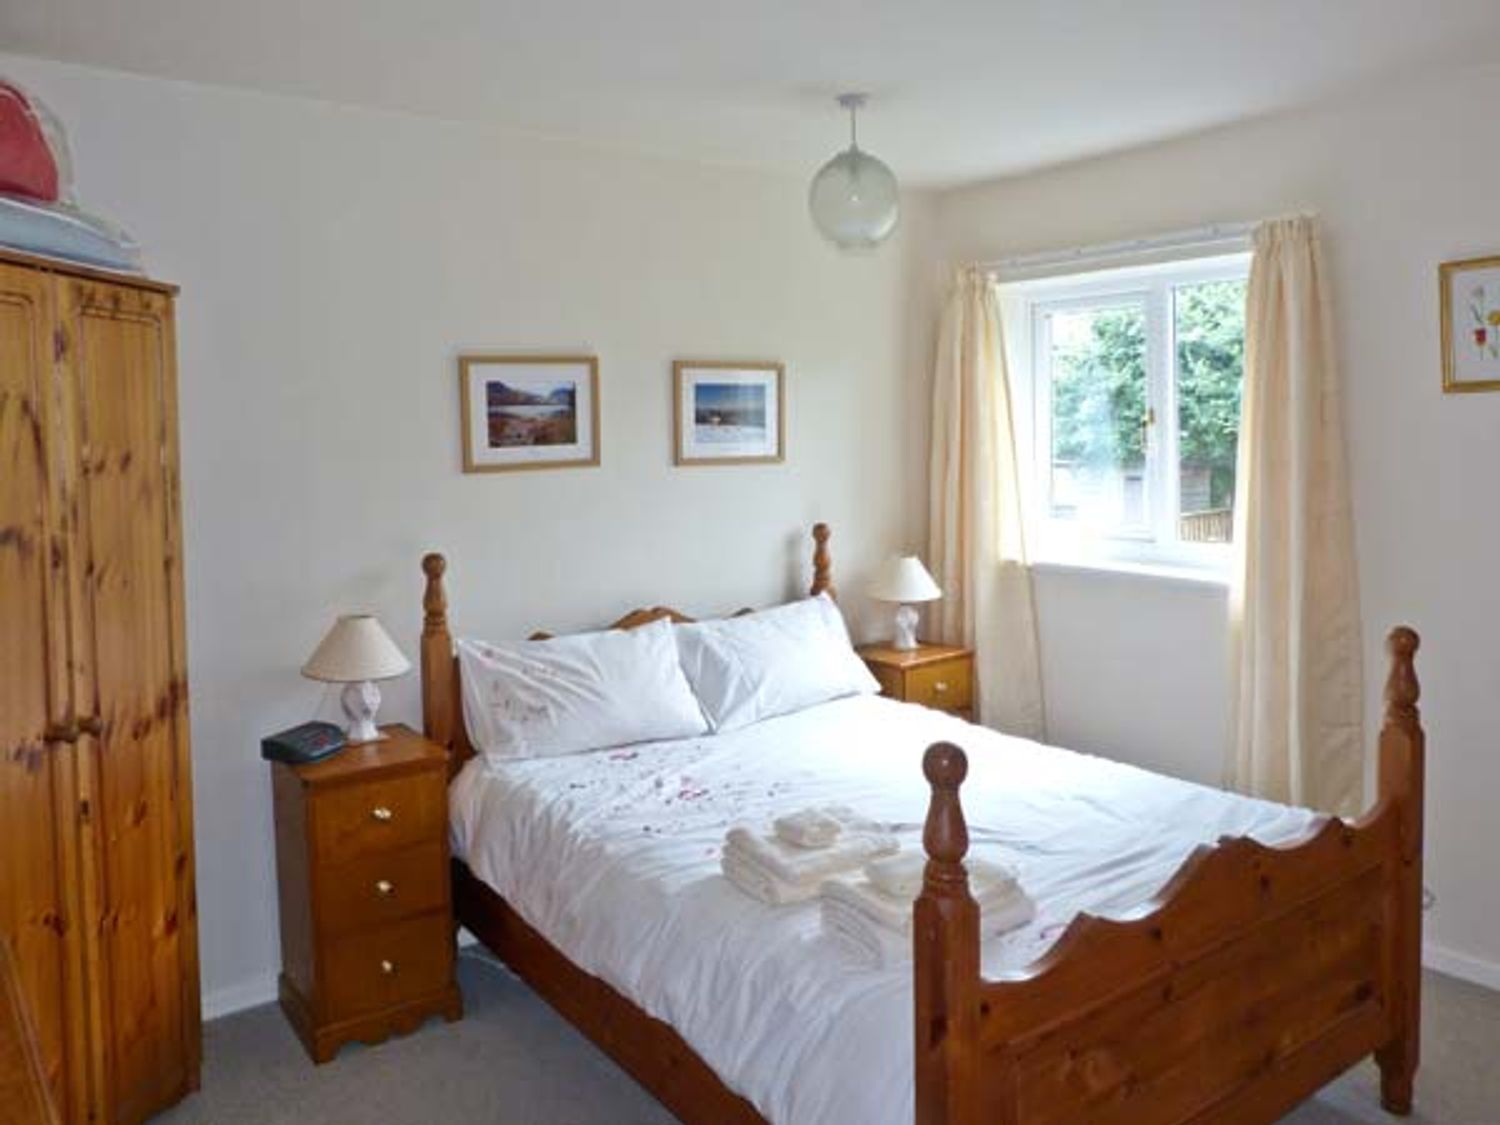 Baytree Apartment, The Lake District and Cumbria